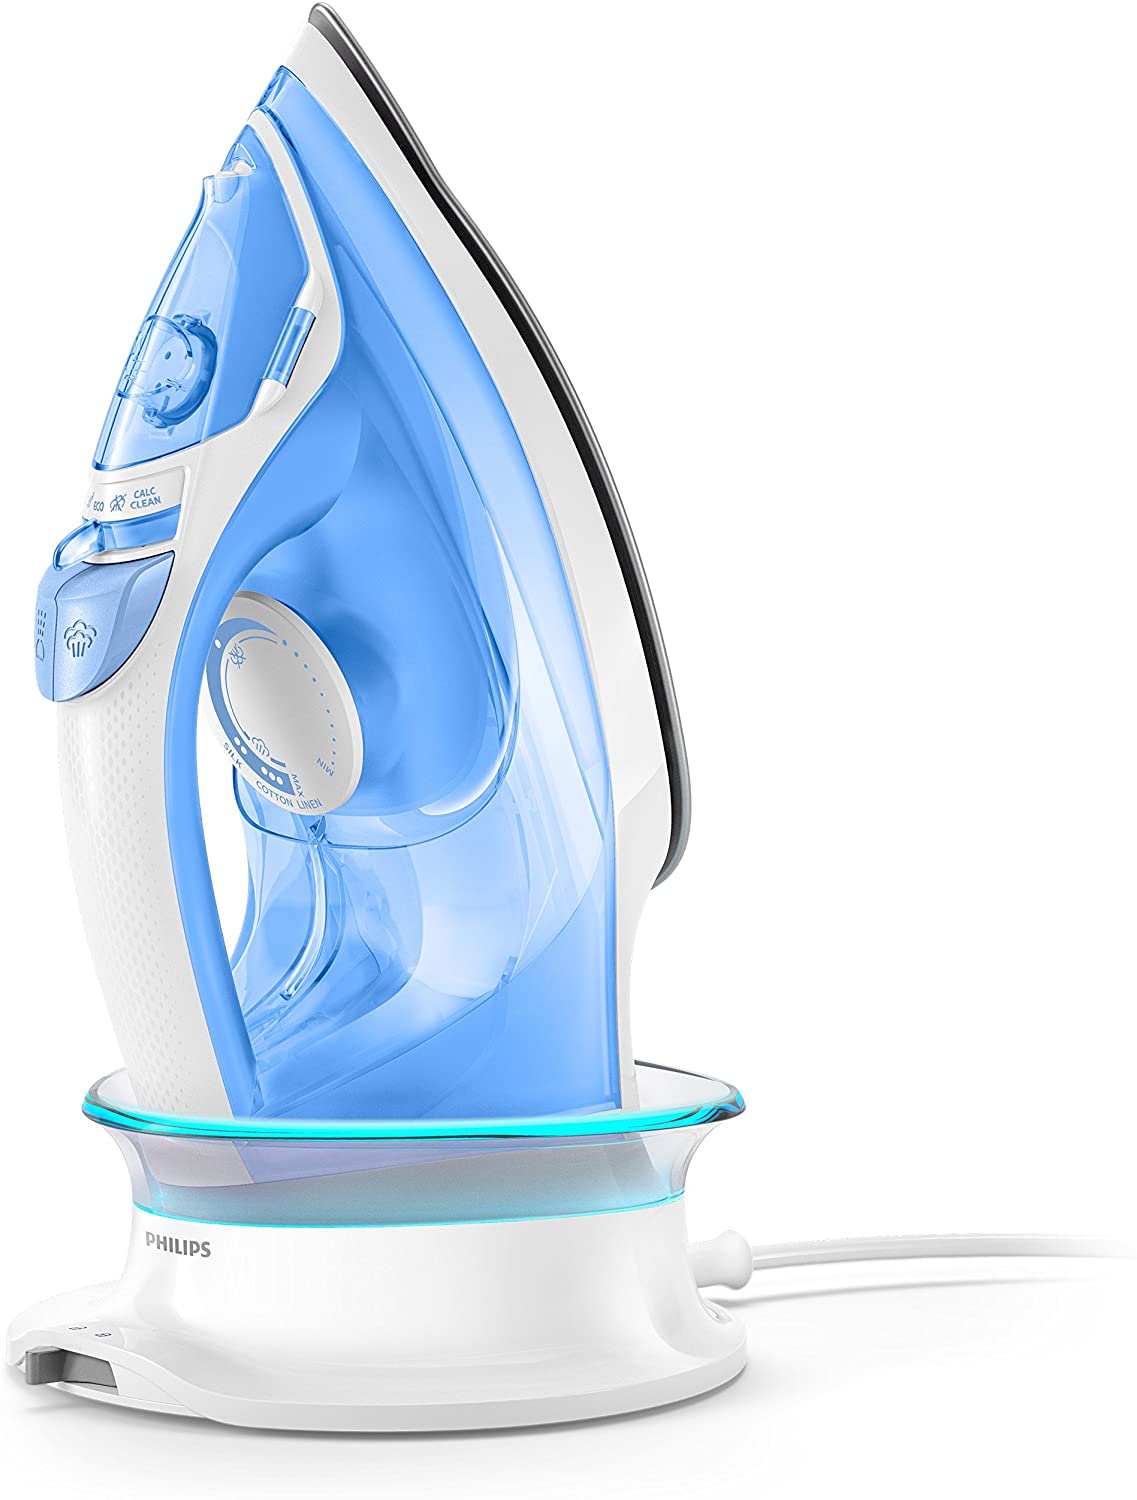 Philips Easy Speed Cordless Steam Iron - GC3672 | reliable performance | lightweight | variable steam settings | safety features | stylish | even heat distribution | Halabh.com'